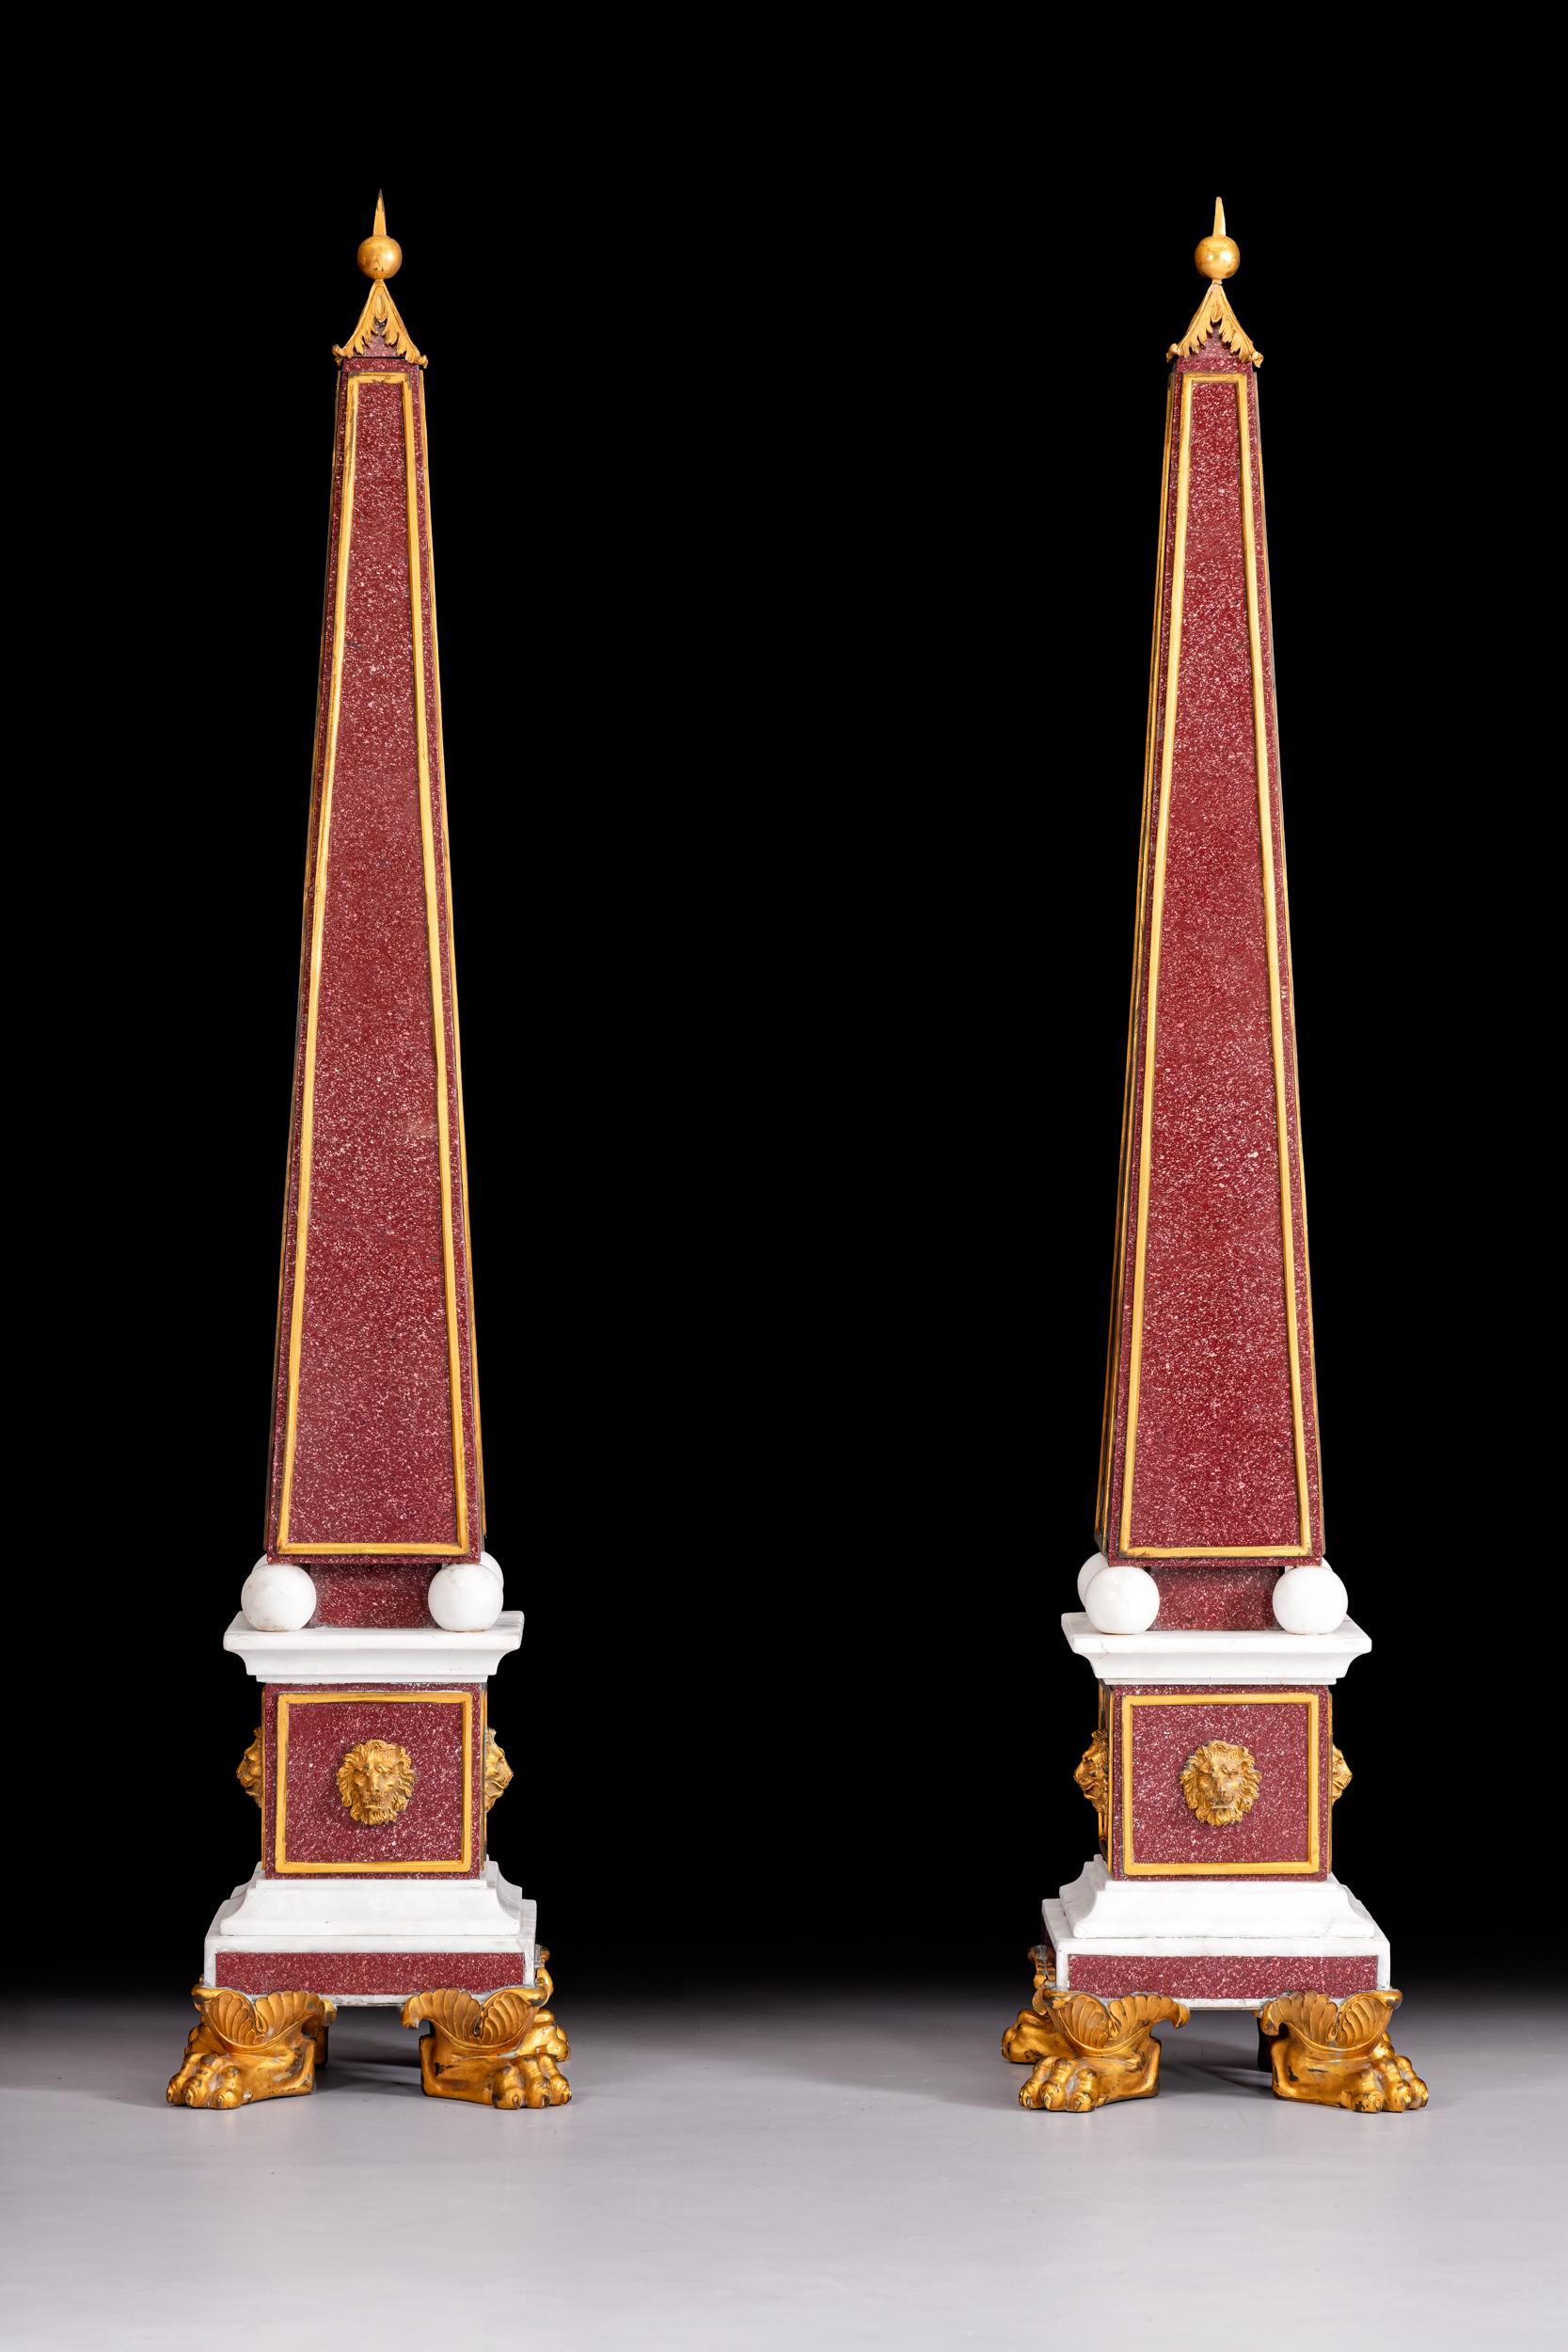 Regency Pair Of Large Early 19th Century Porphyry Marble & Ormolu Mounted Obelisks For Sale